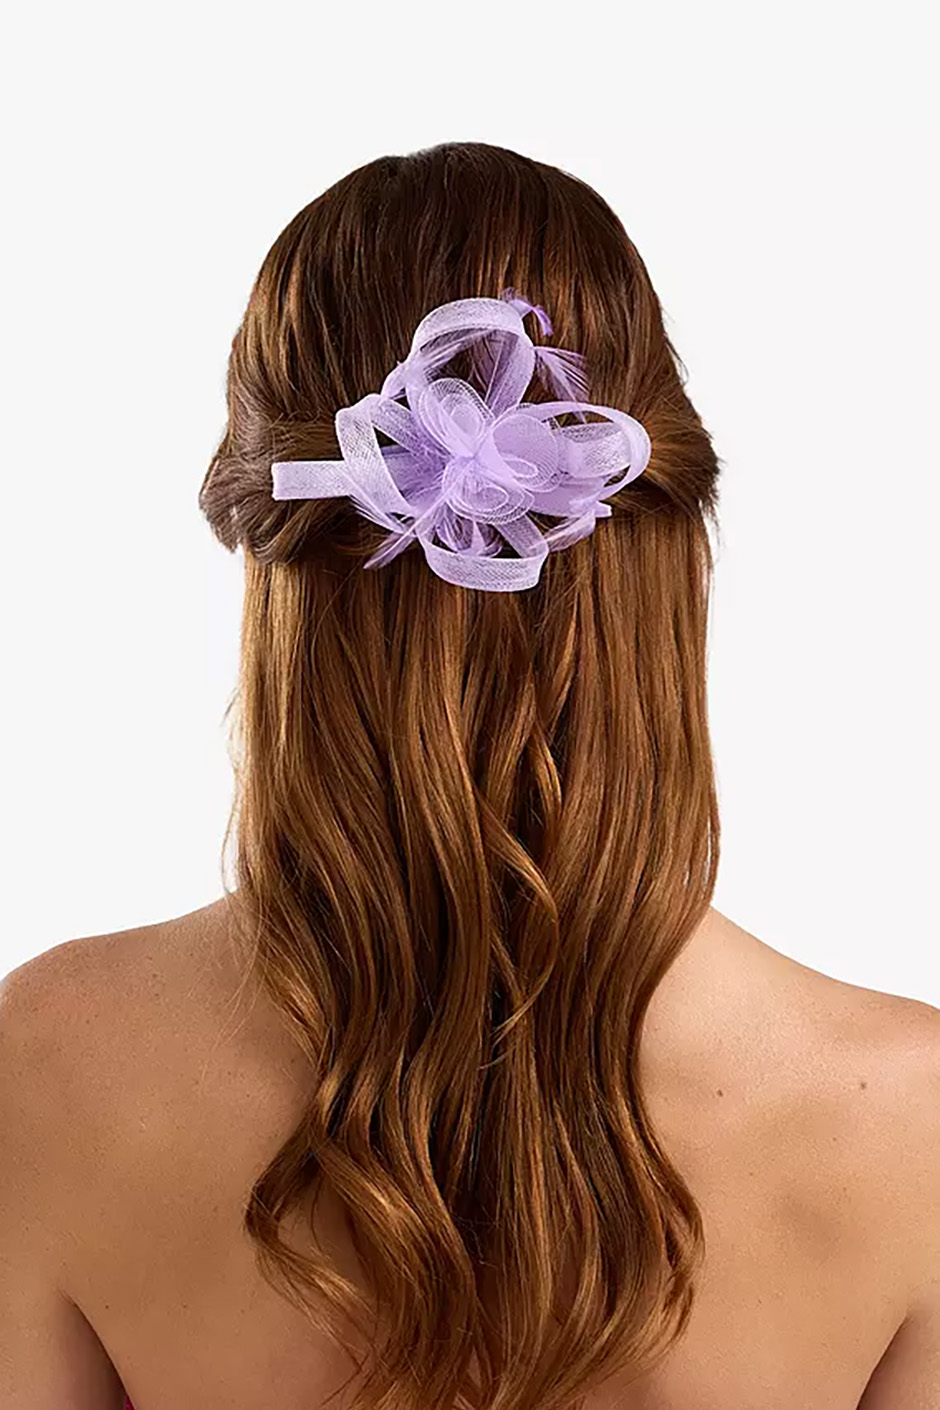 Lilac small hair fascinator for weddings from John Lewisstyled with half up half down hairstyle